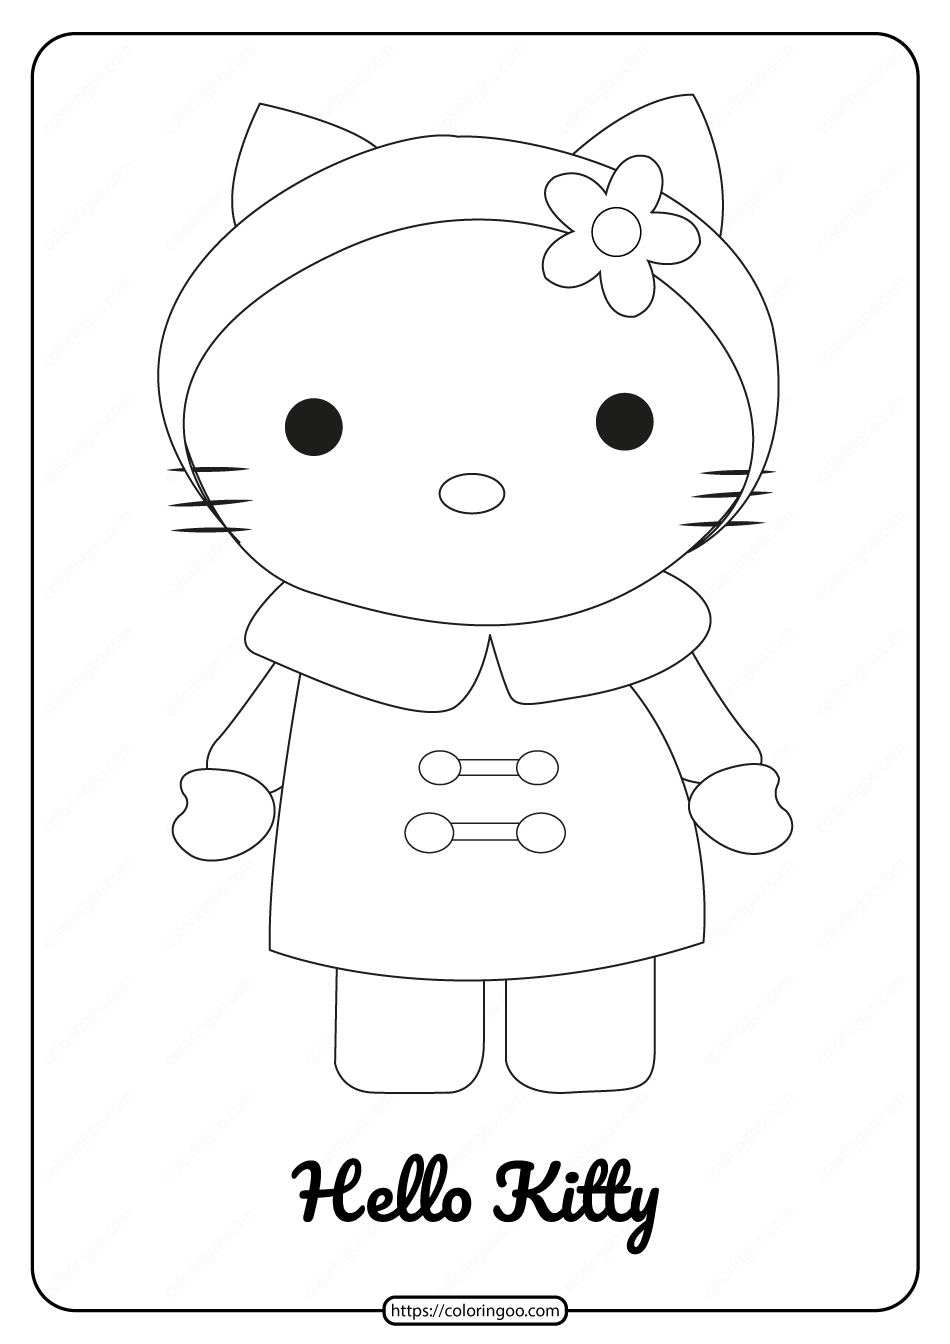 printable hello kitty wearing a raincoat coloring page